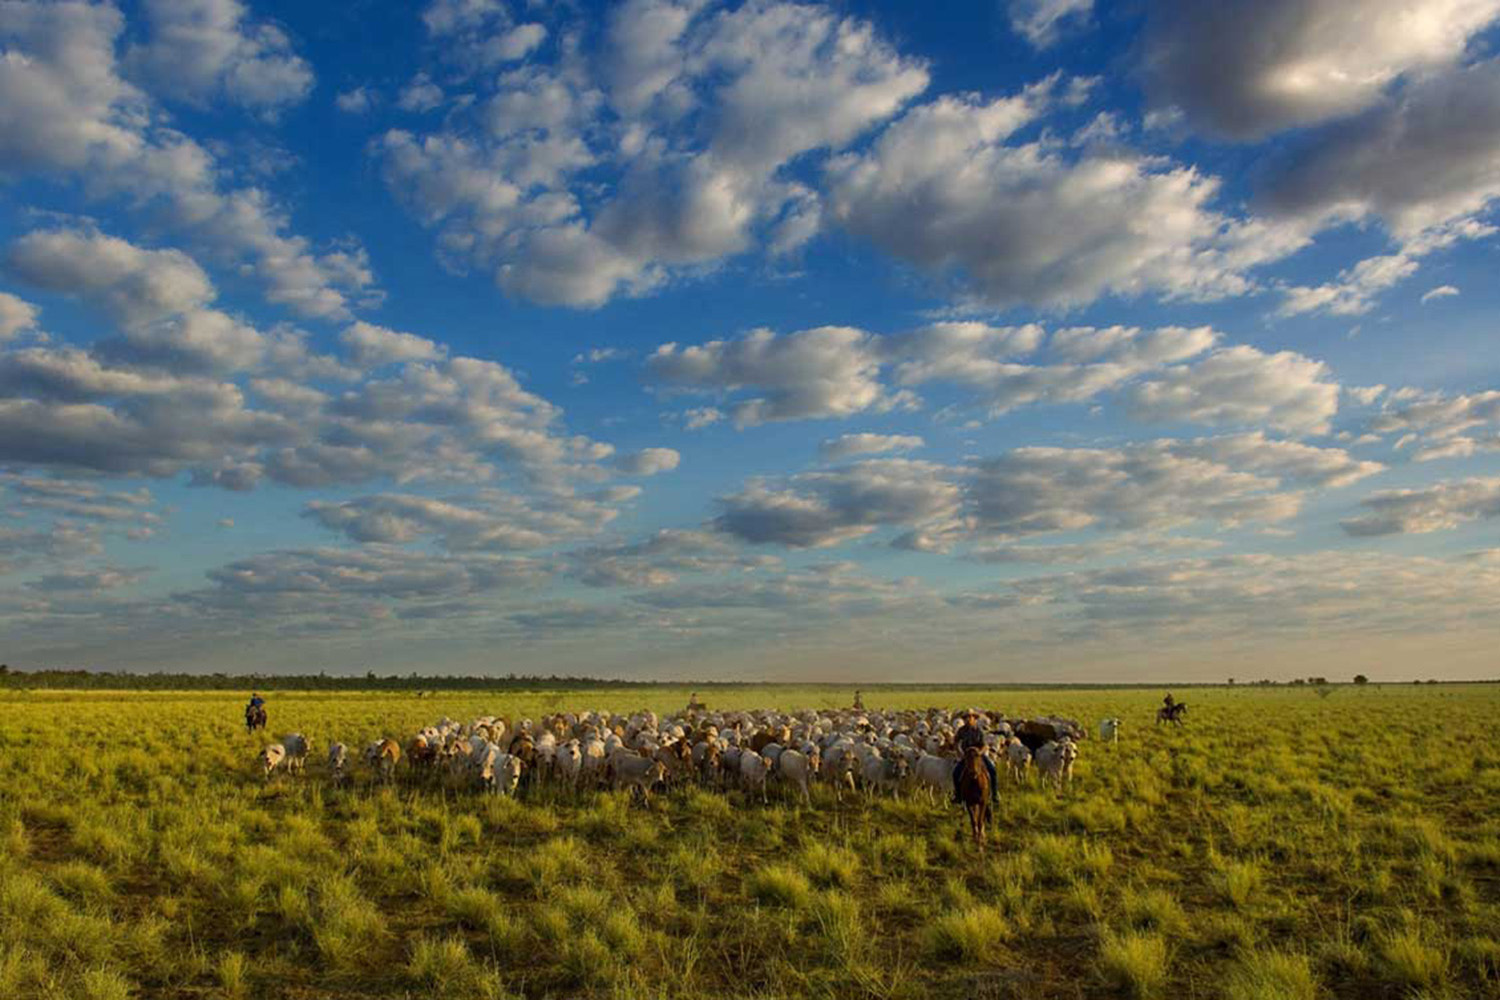 image of AARONTAIT COPYRIGHTED 2014 366 RURAL PHOTOGRAPHER FARM LIFE AGRICULTURE WOOL BEEF STOCKMAN MUSTER CATTLE FARM AUSTRALIAN MUSTER EPIC BIG SKY MOB GULF COUNTRY